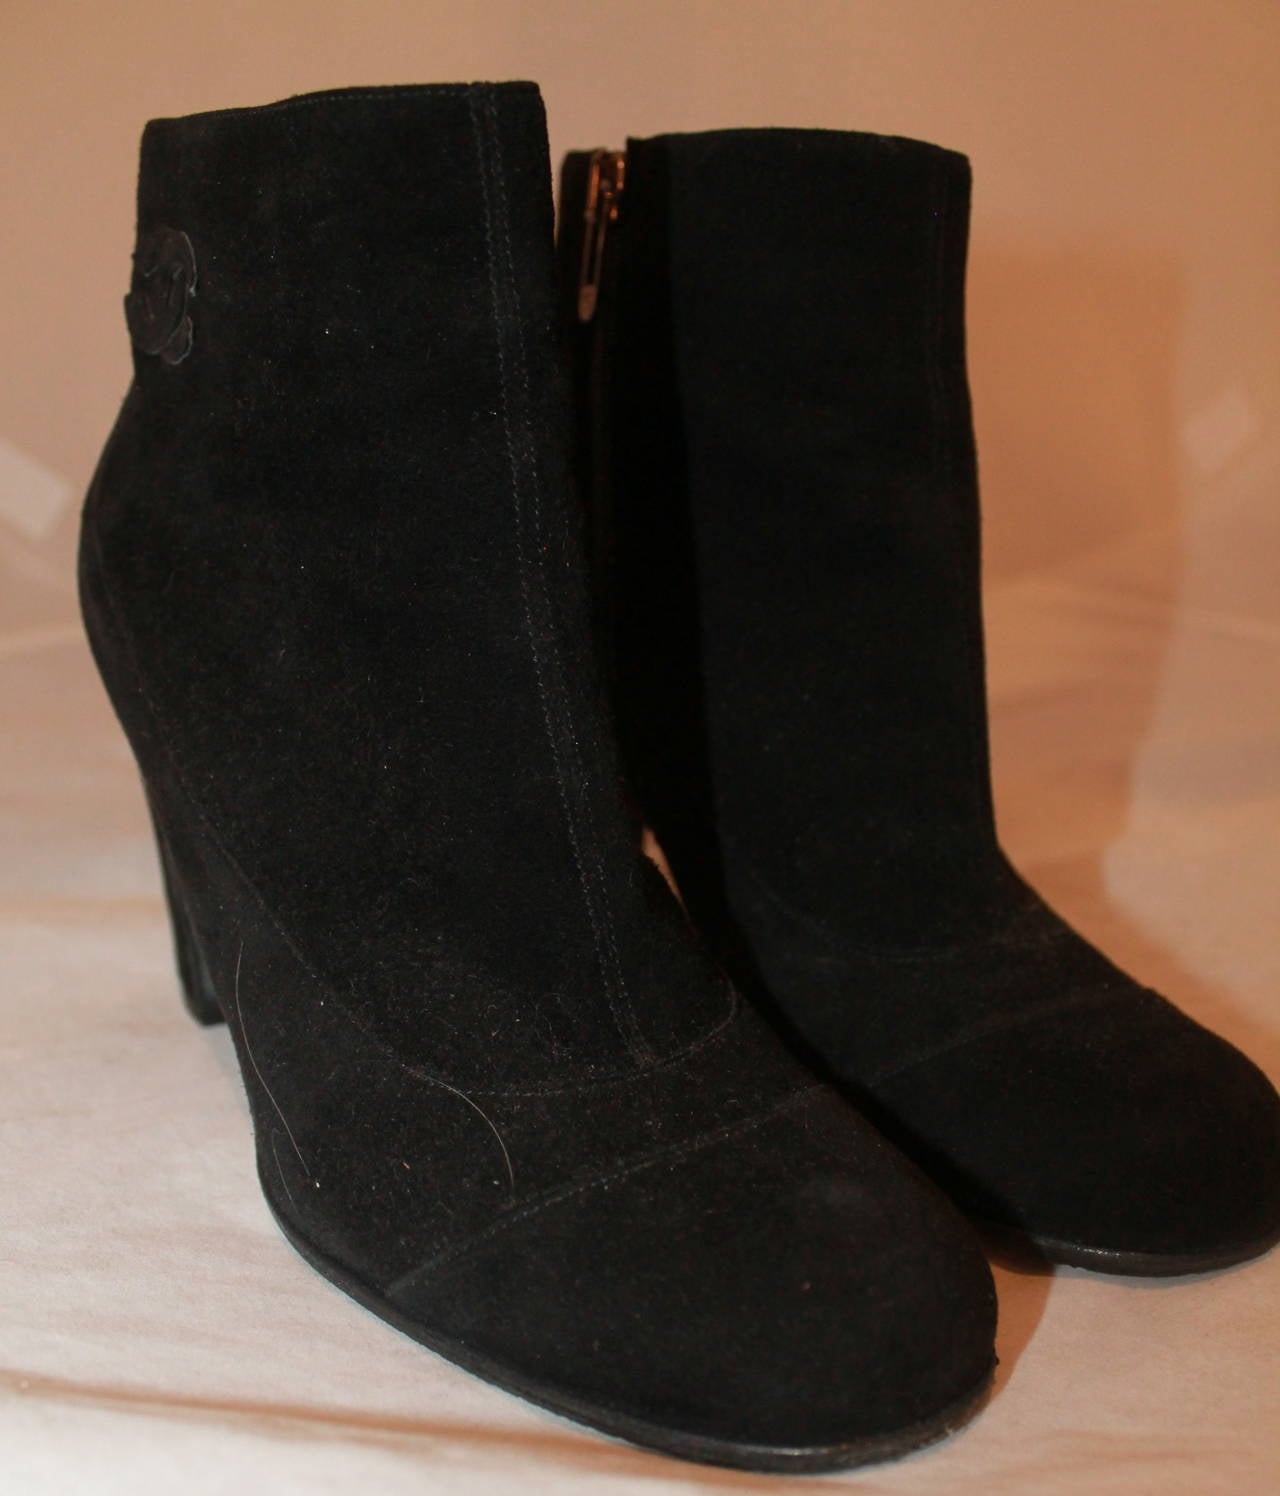 Chanel Black Suede Booties - 37. These booties are in excellent condition with visible wear on the bottom.